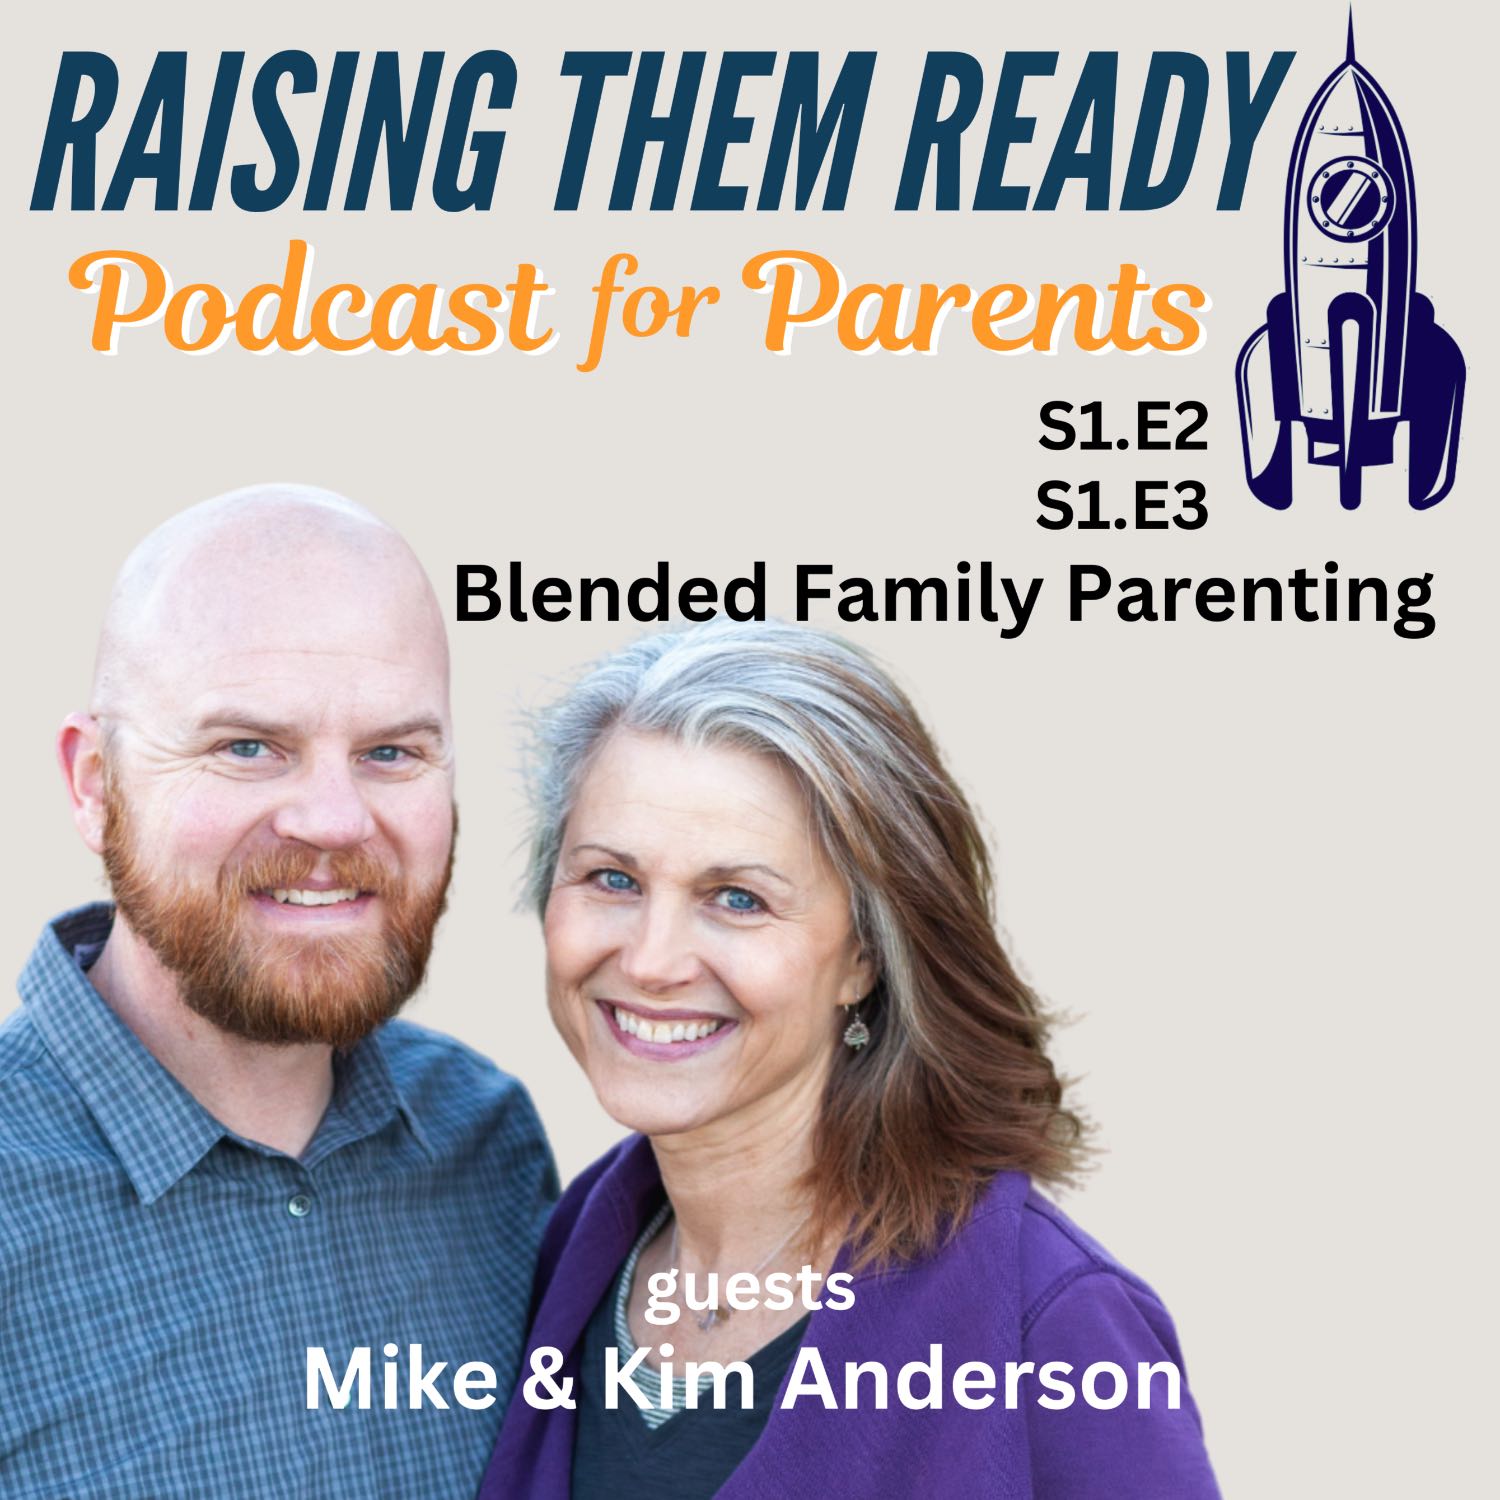 Blended Family - Part 1, with guest Mike & Kim Anderson